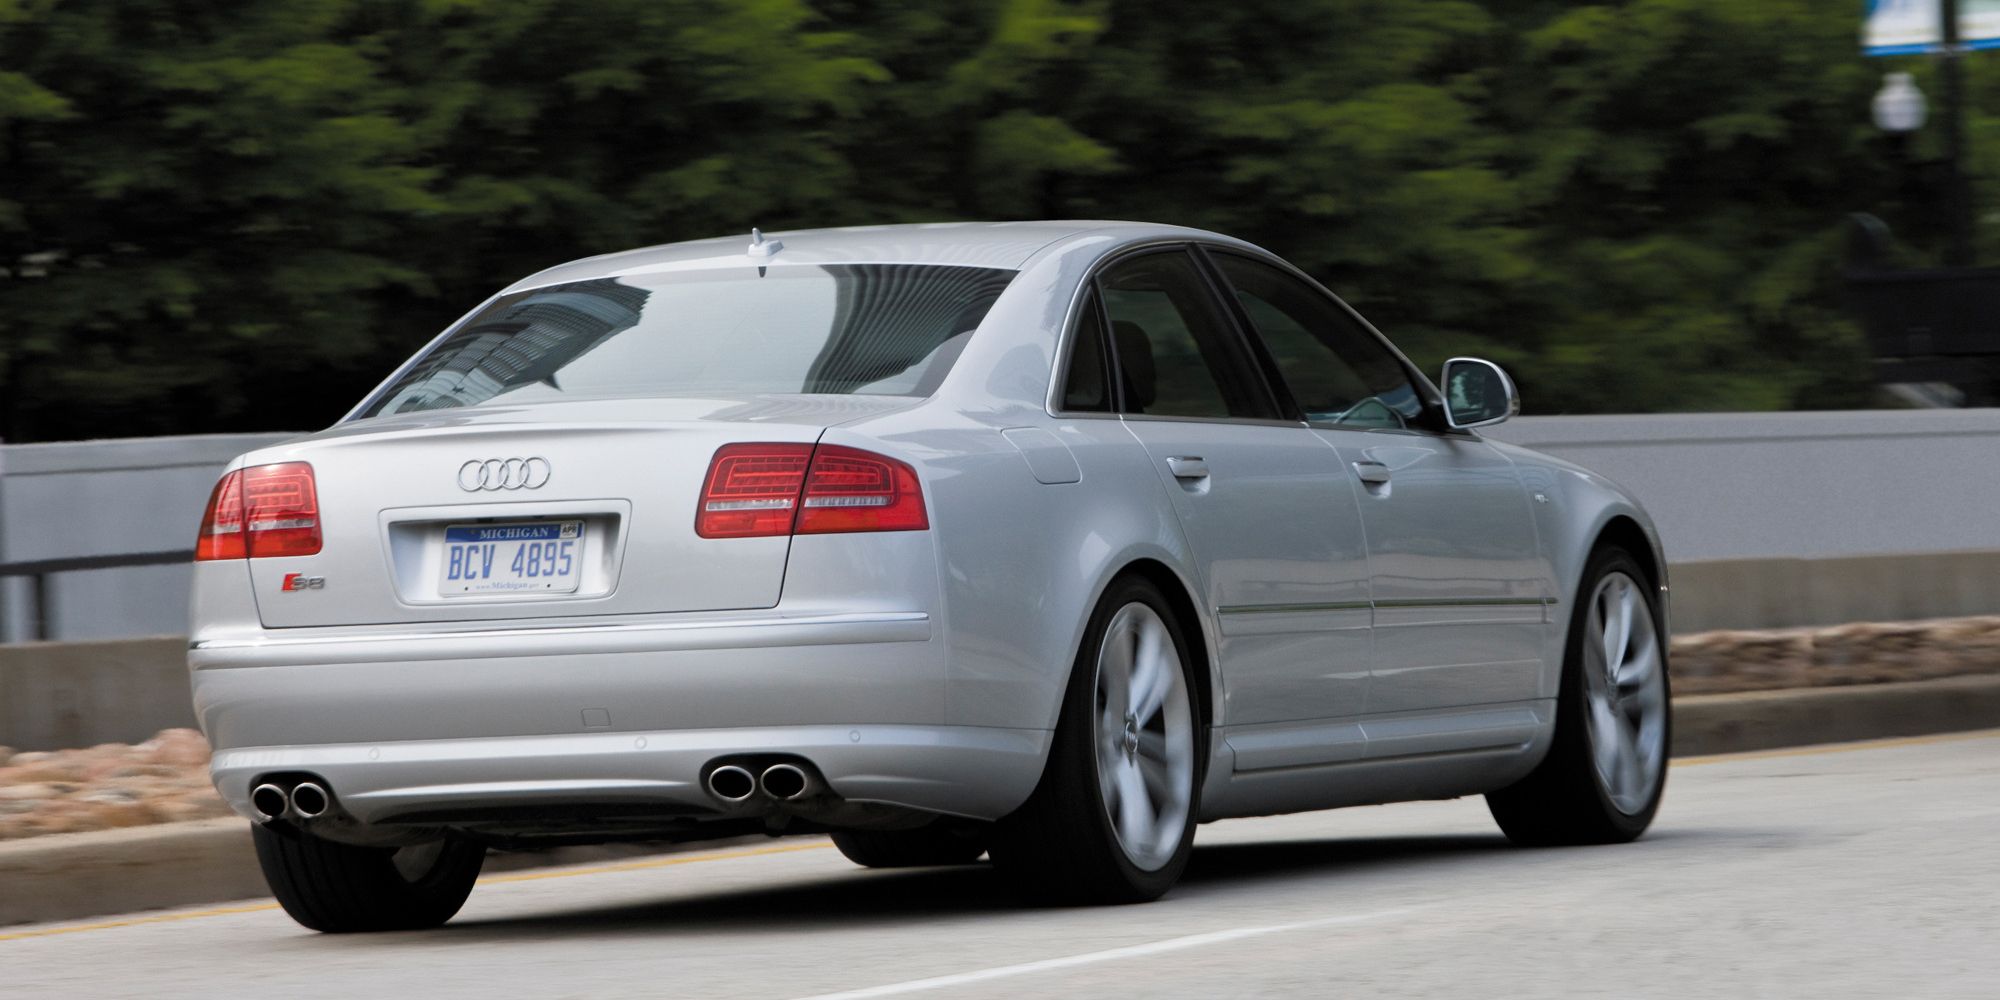 The rear of a D3 Audi S8